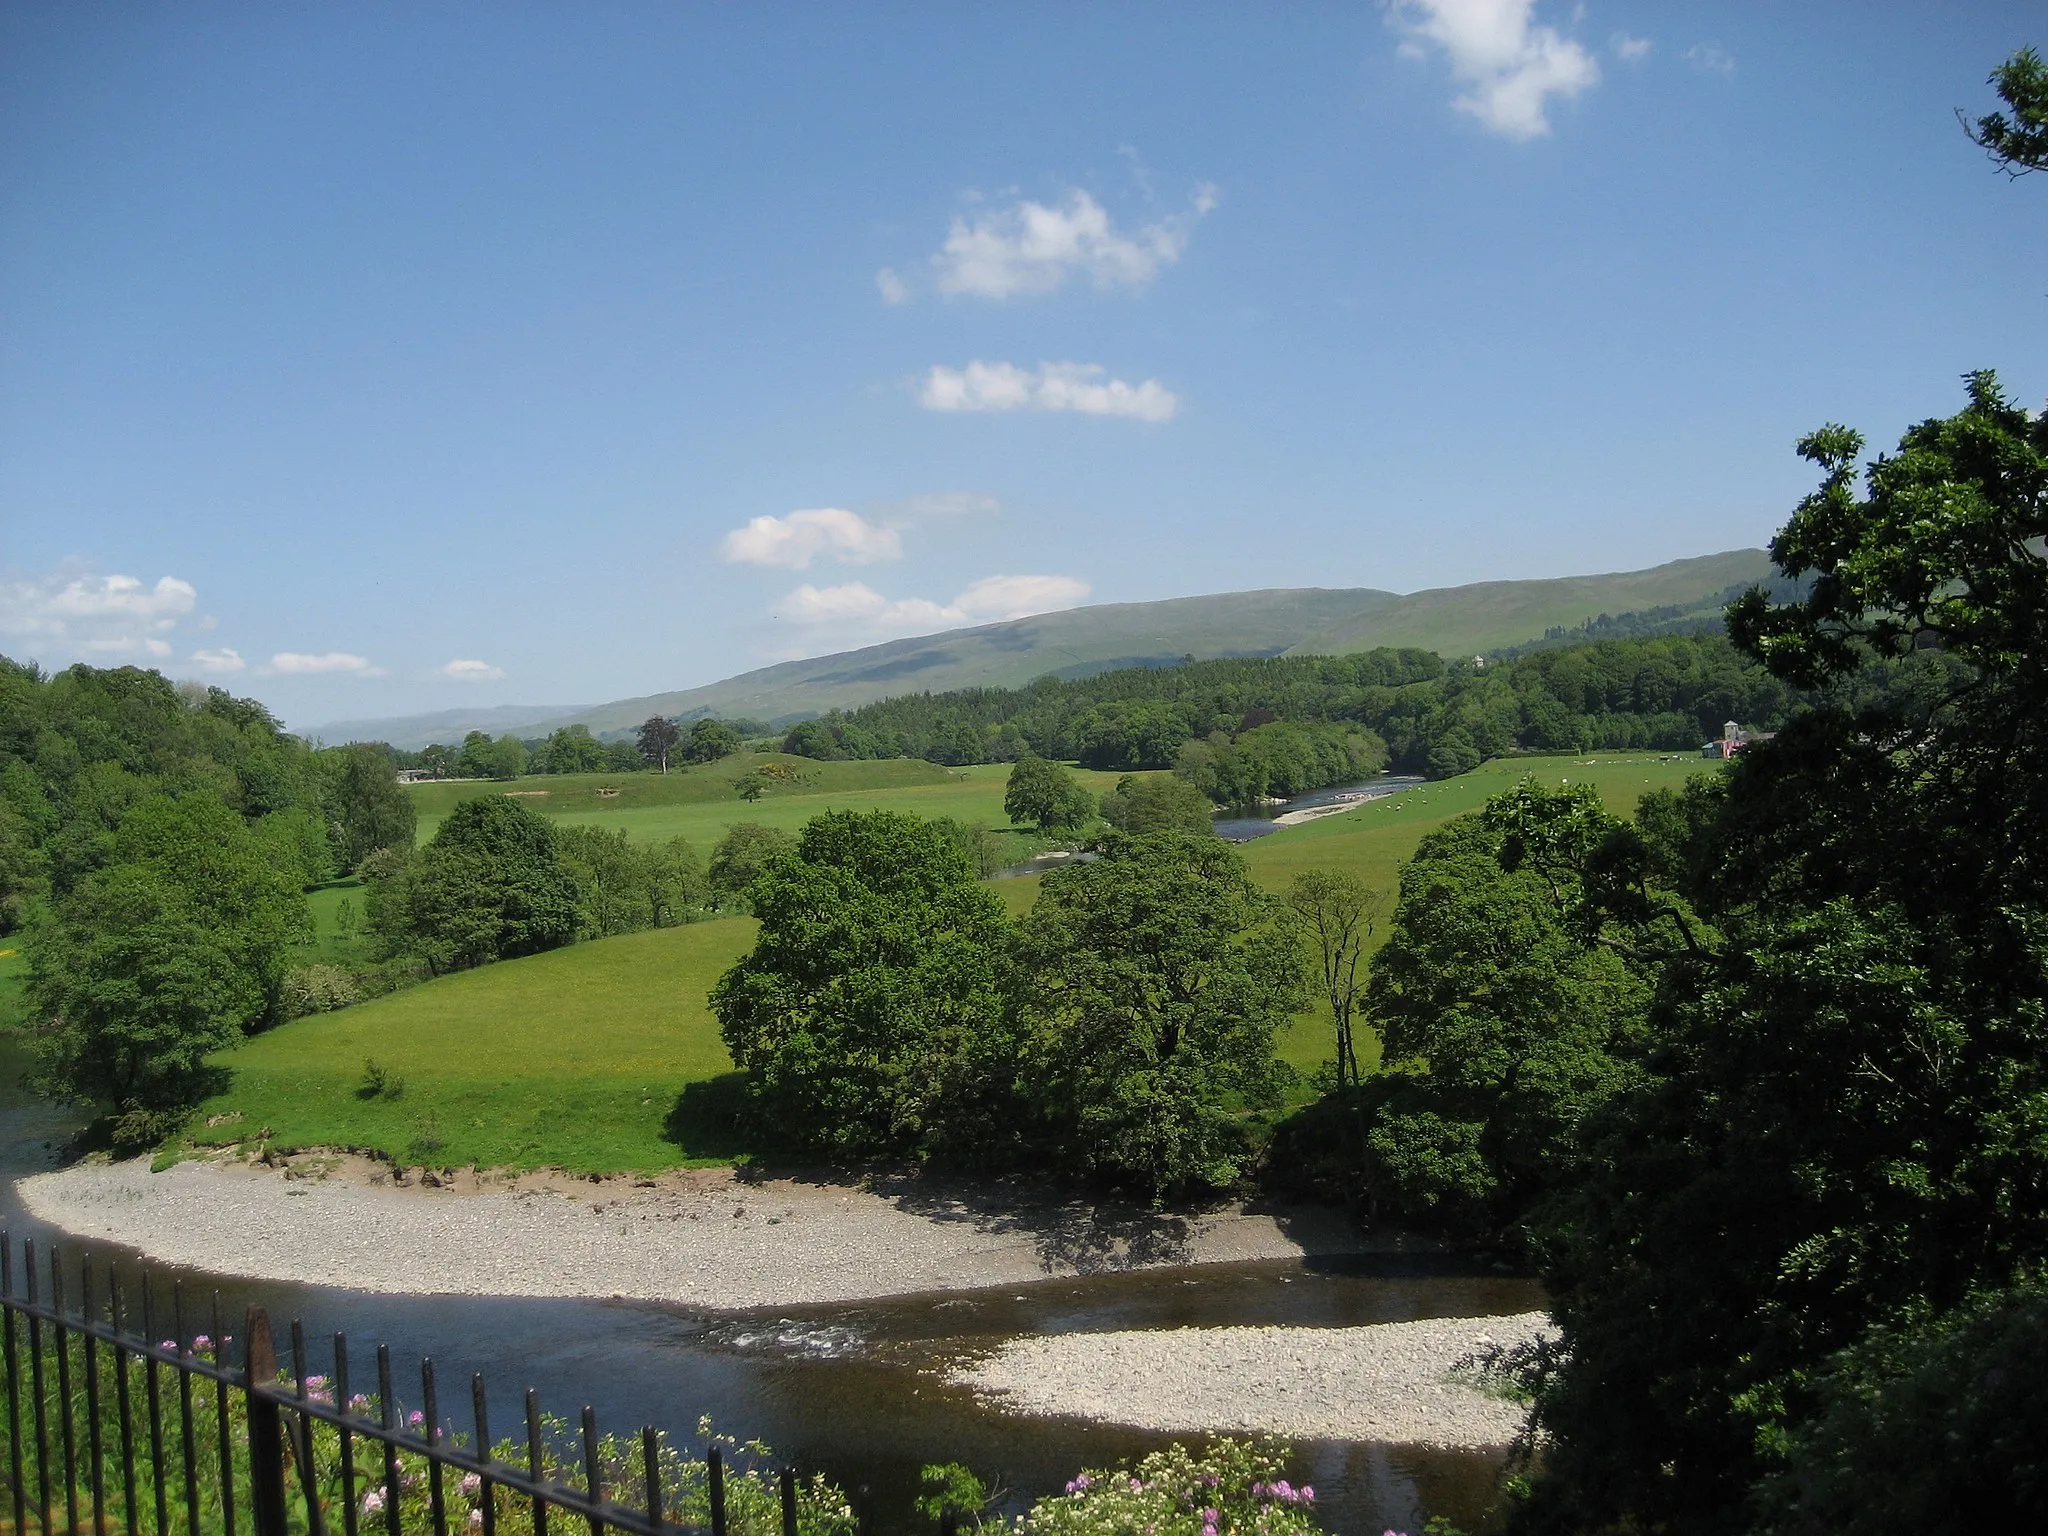 Photo showing: This view is the location known as 'Ruskin's View' in Kirkby Lonsdale, Cumbria, England.  This view was made famous by Turner who painted and made it famous.  The view was described by Ruskin as "One of the loveliest views in England' in his 'Fors Clavigera'